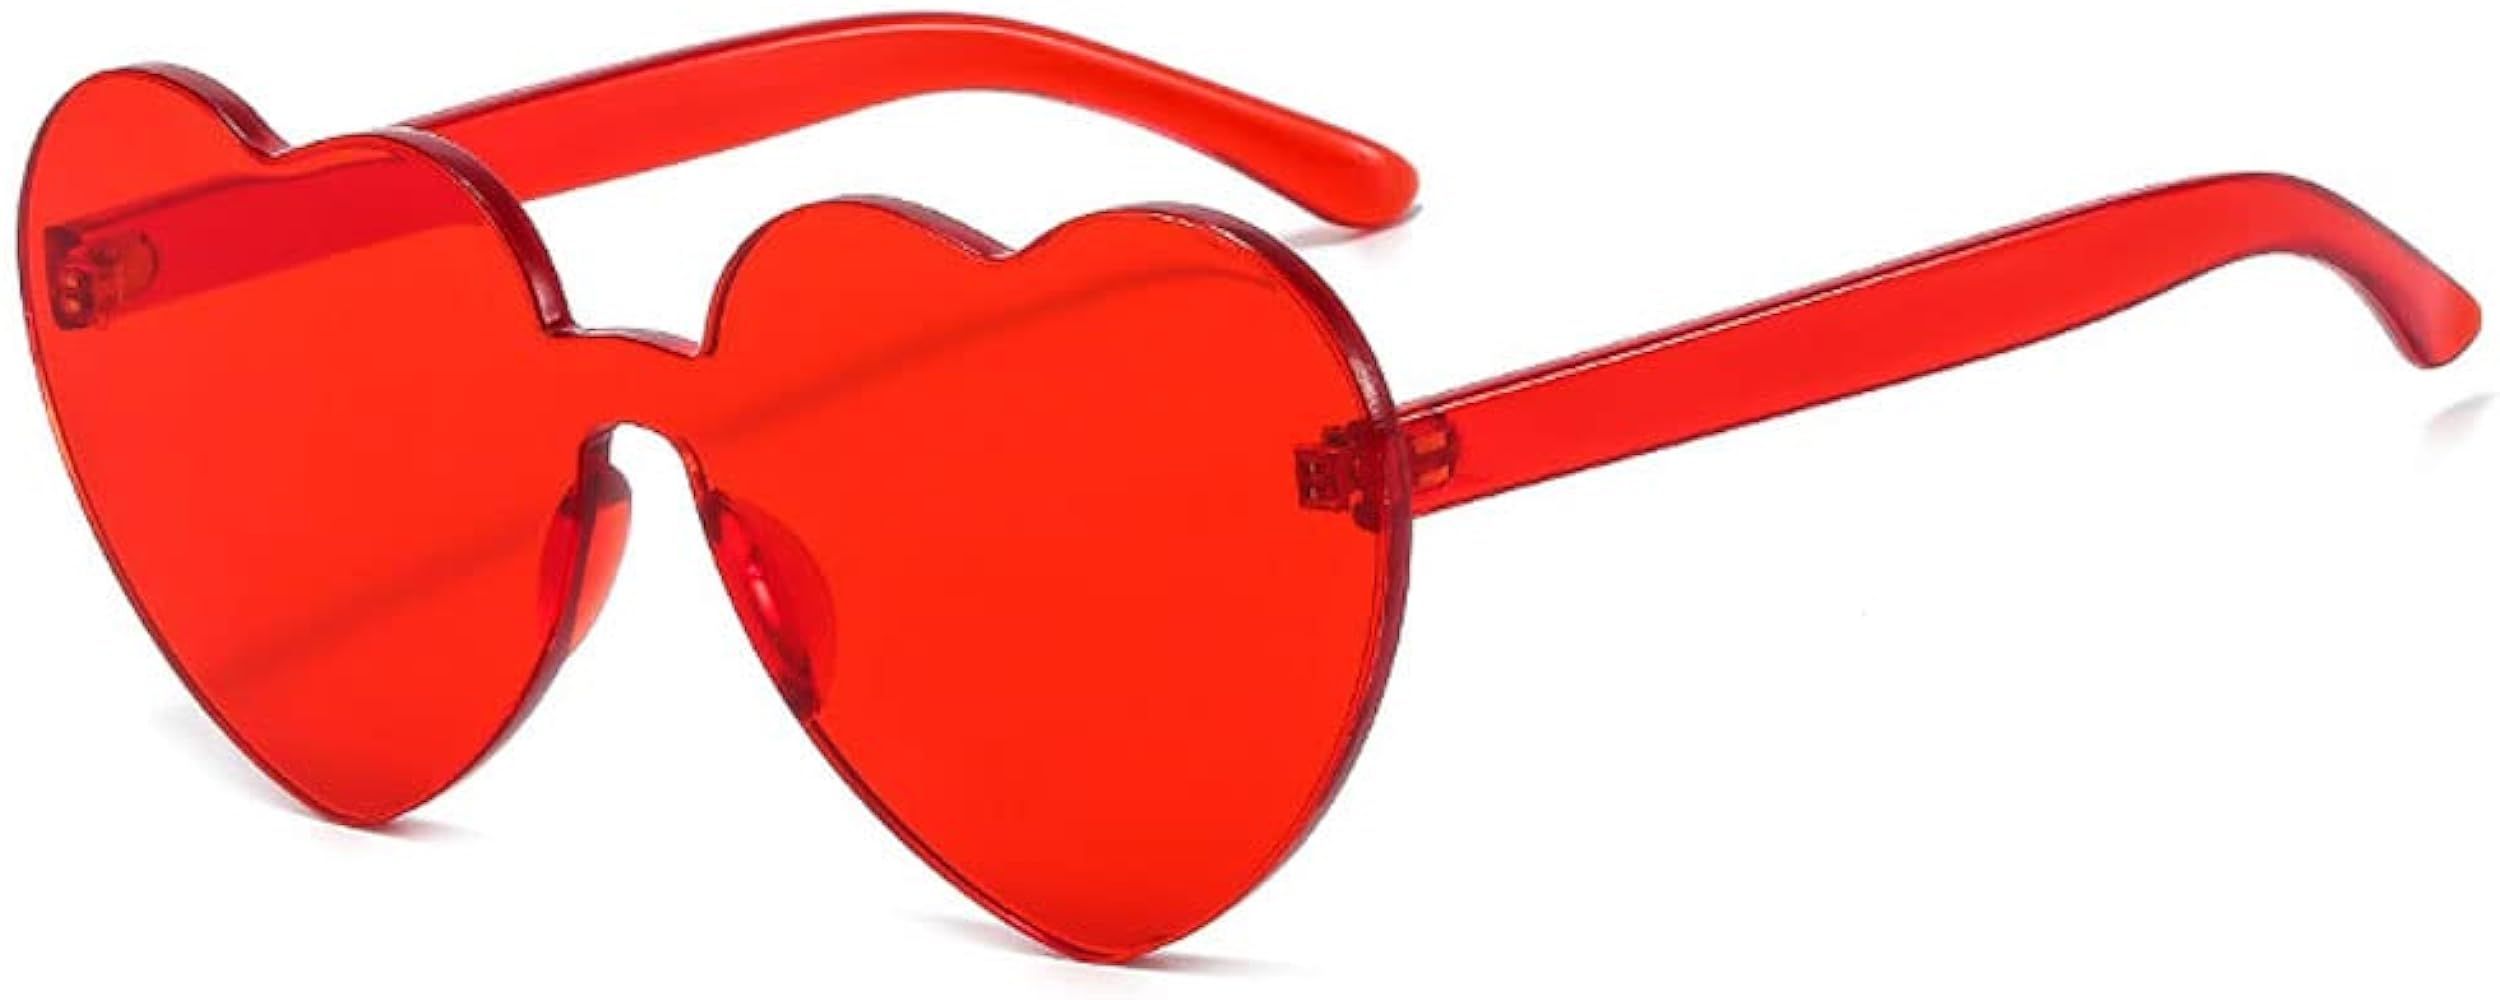 YooThink Love Heart Shaped Sunglasses for Women Colorful Rimless Sunglasses Party Sunglasses | Amazon (US)